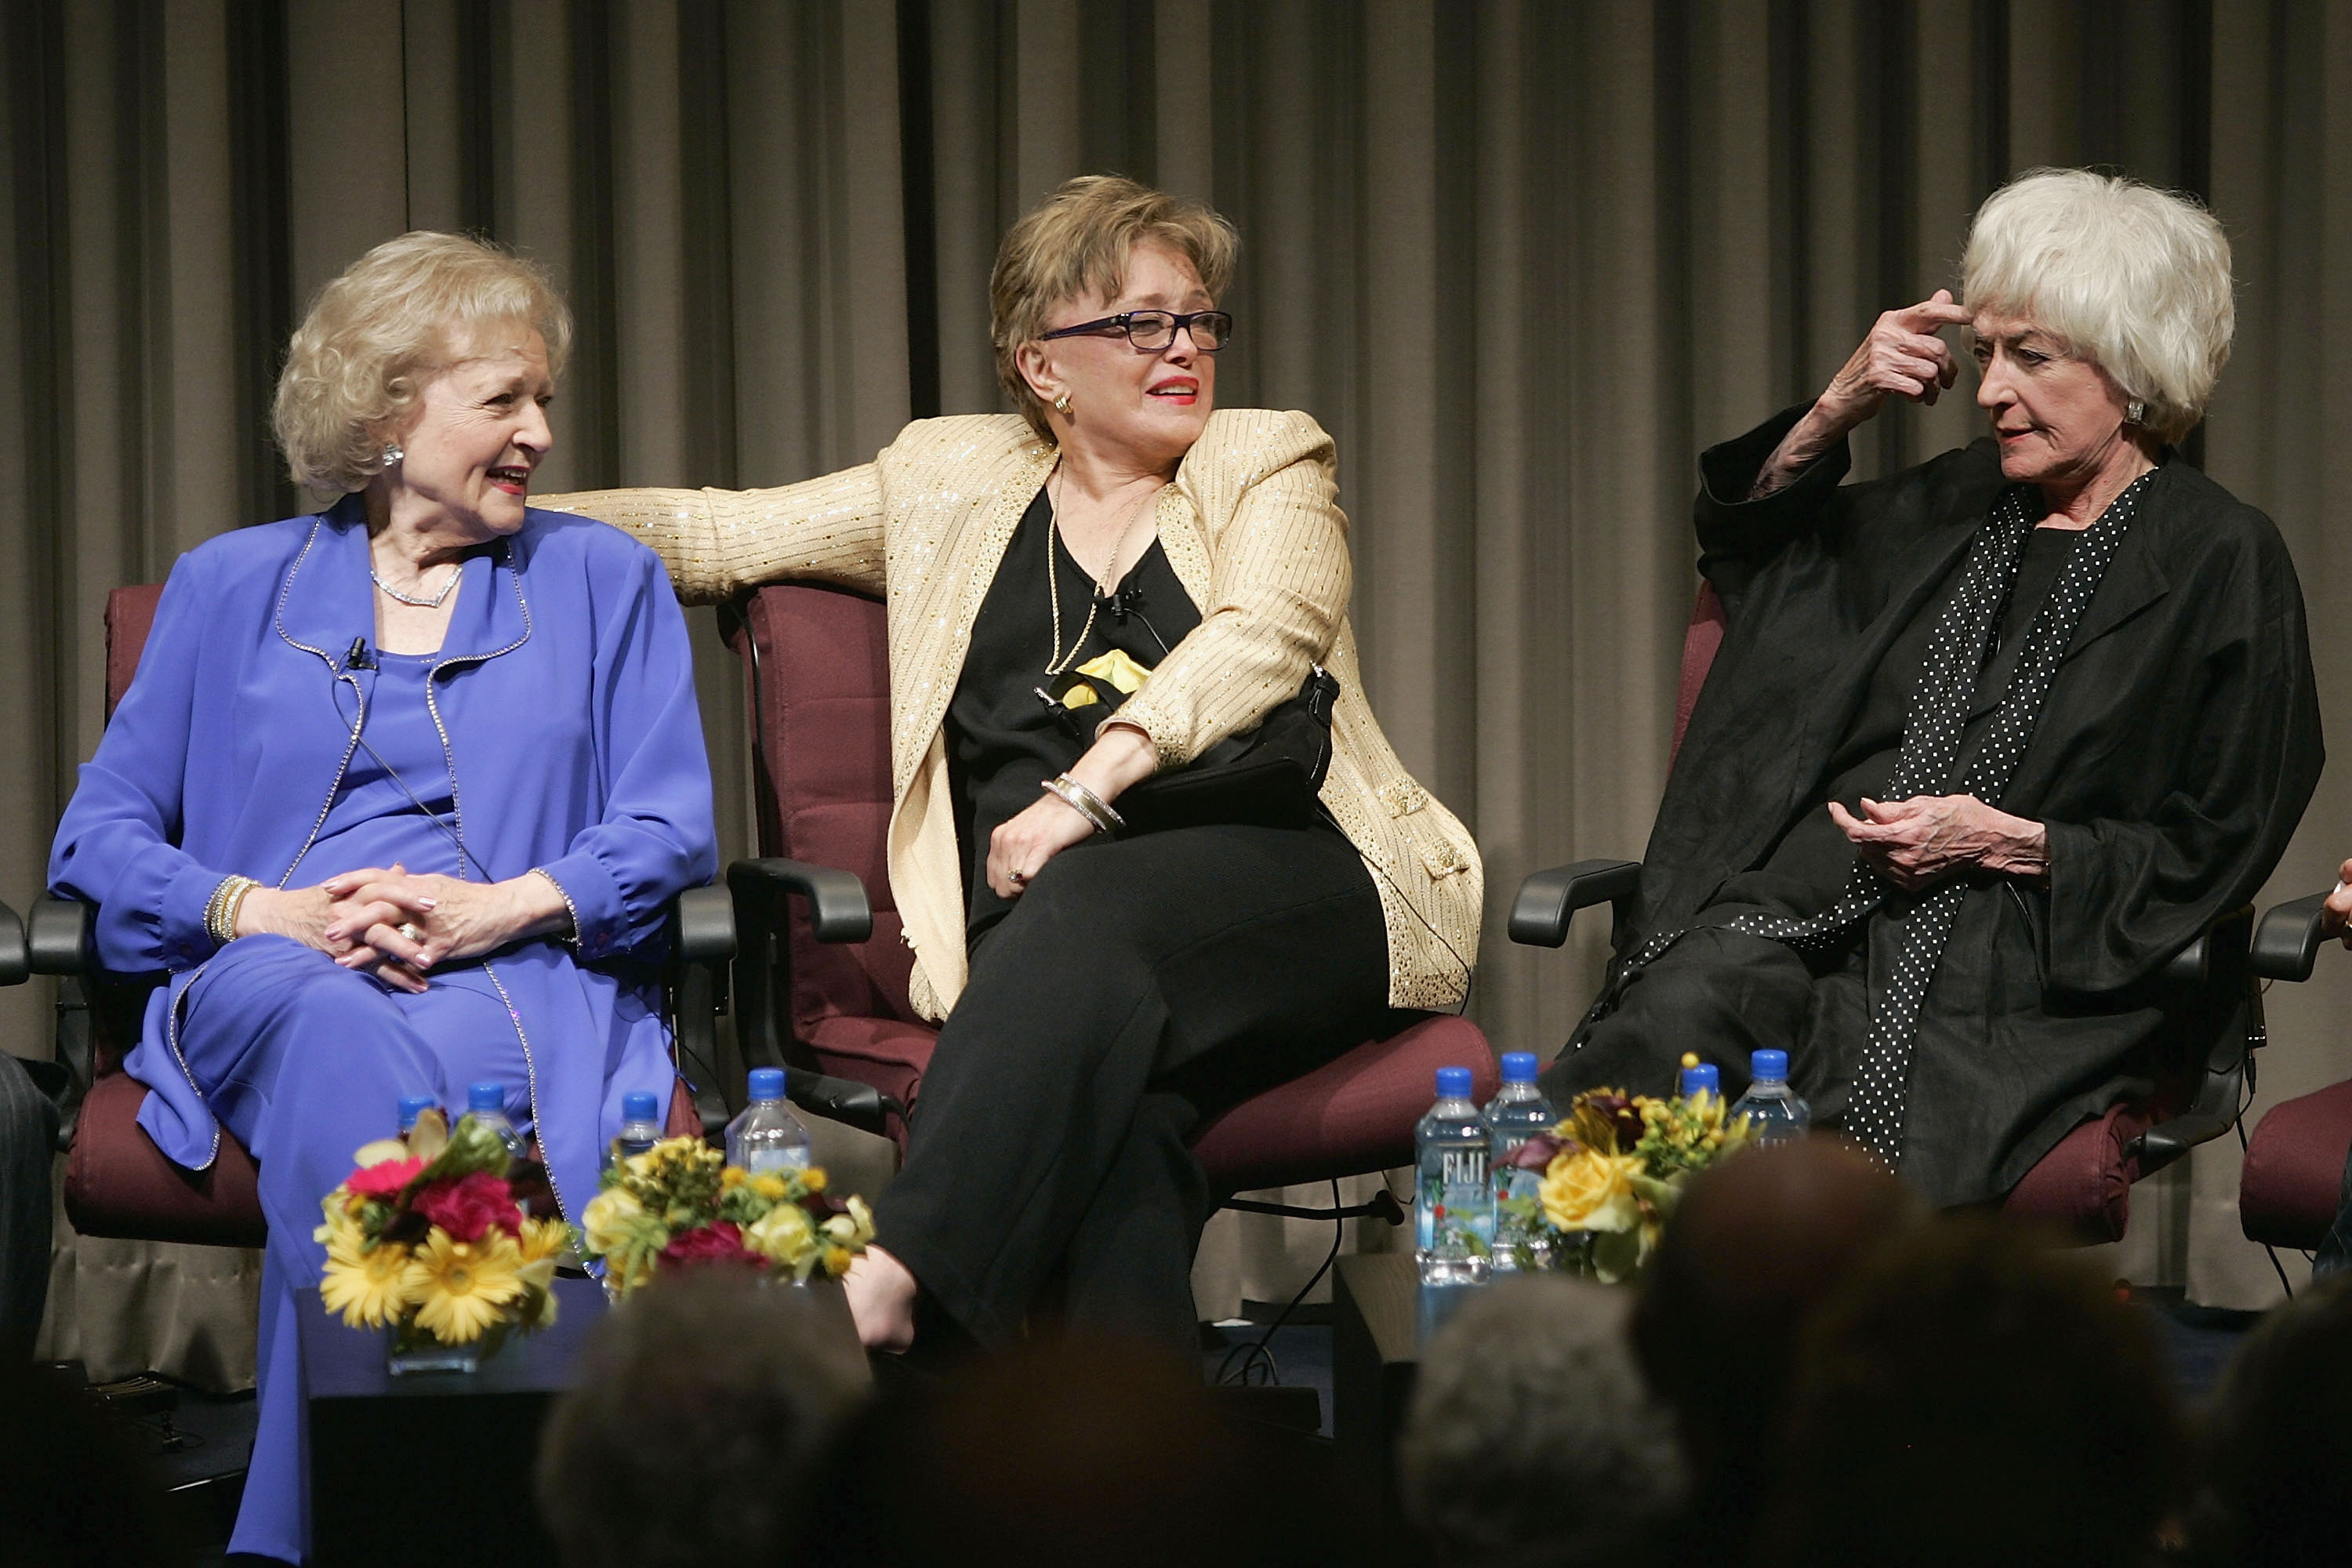 Betty White, Rue McClanahan and Bea Arthur chat on stage during the ' The Golden Girls ' DVD release party